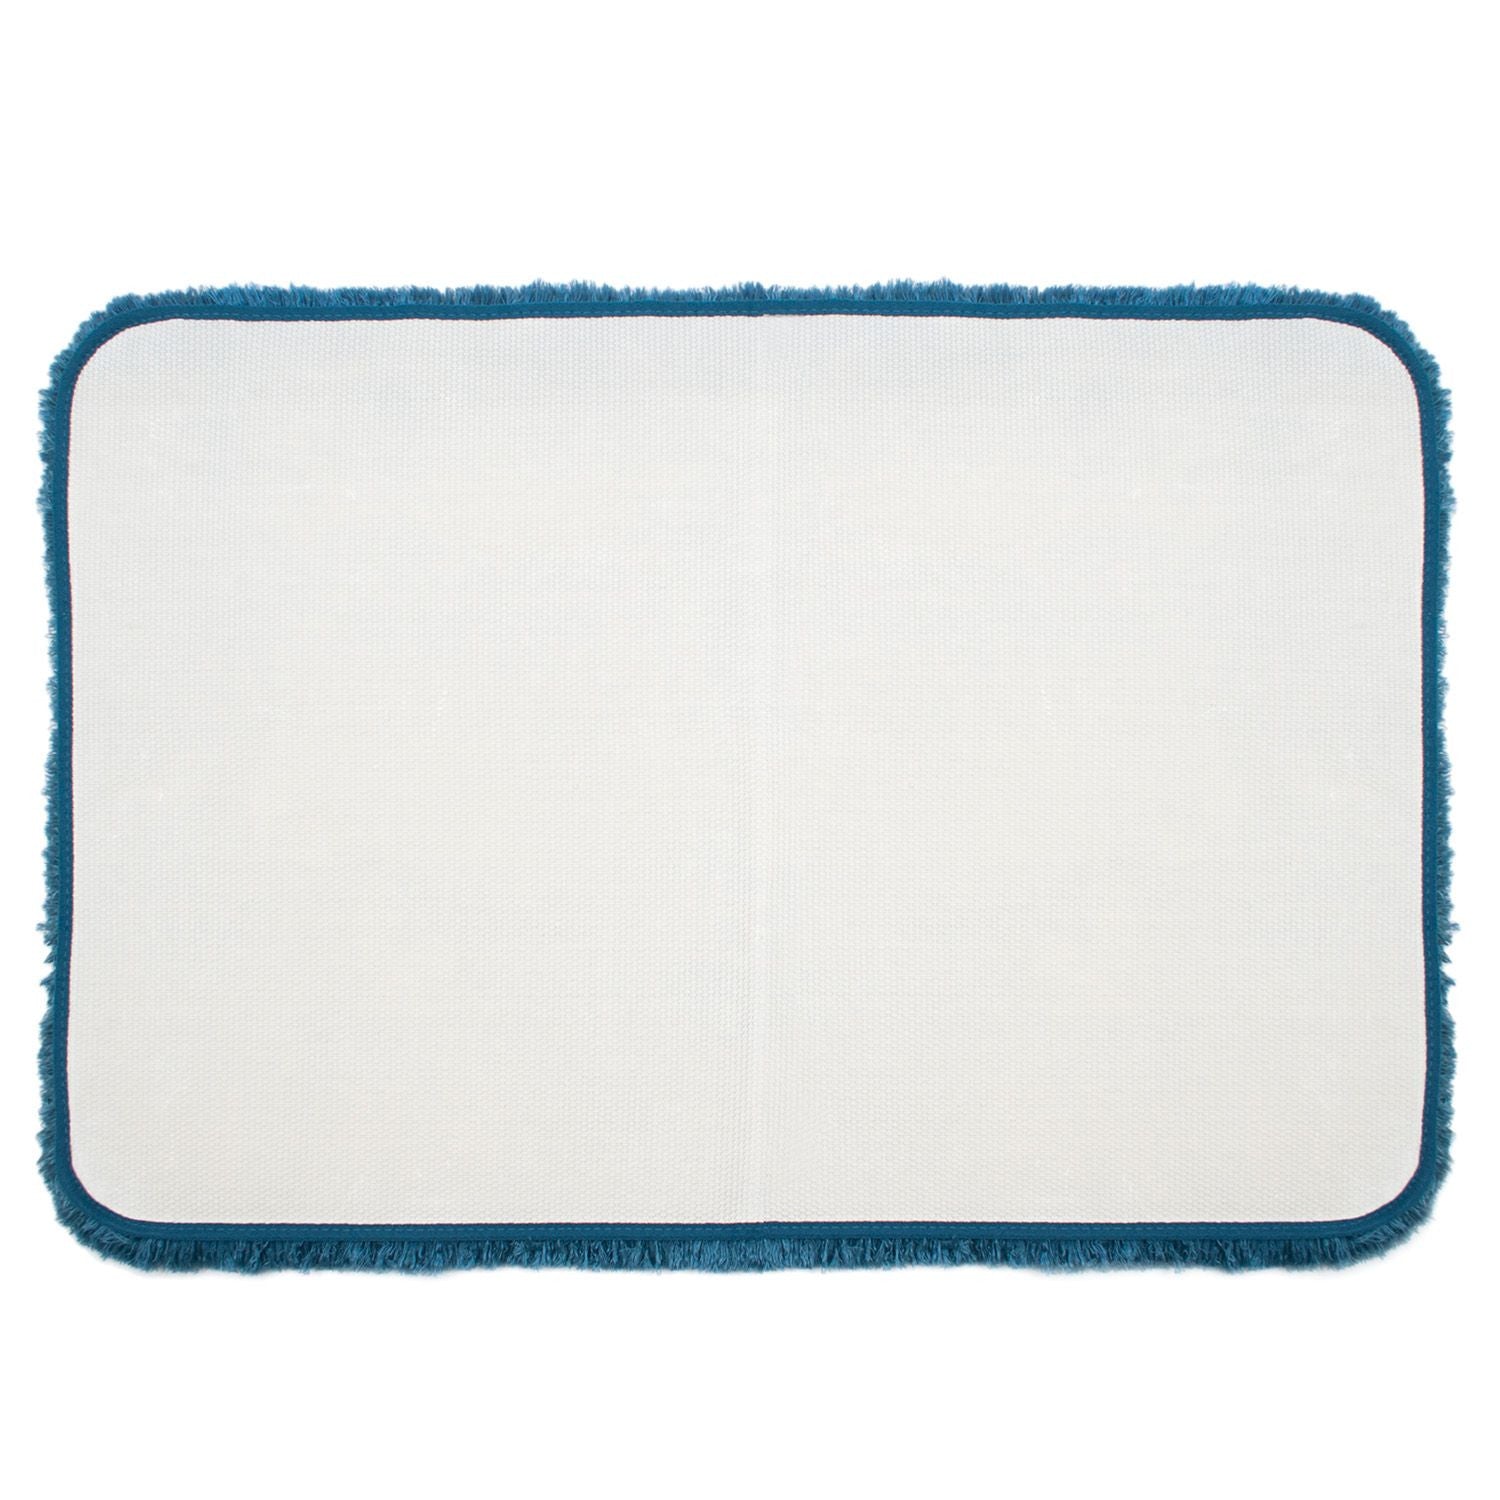 Member's Mark Hotel Premier Collection Bath Rug (Assorted Colors